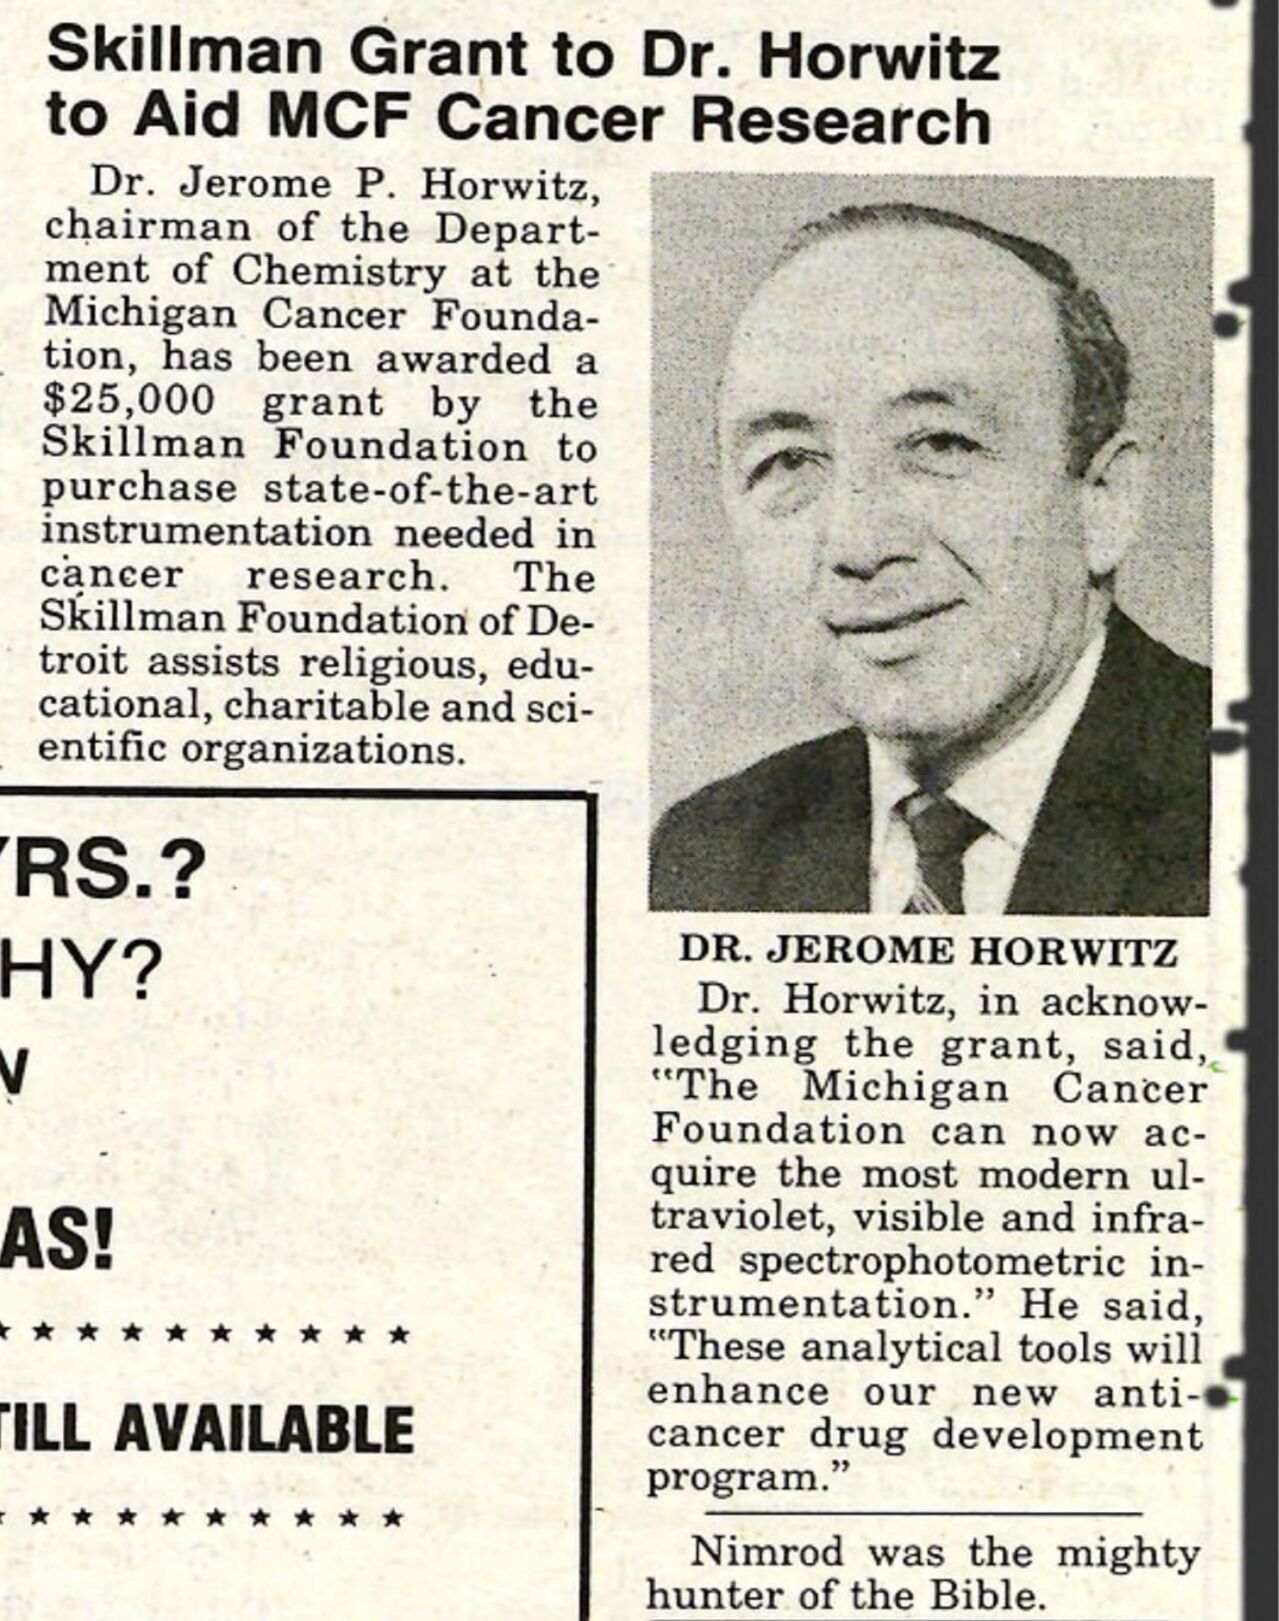 Looking Back: The 'Other' Jerome Horwitz | Mike Smith's Column | thejewishnews.com